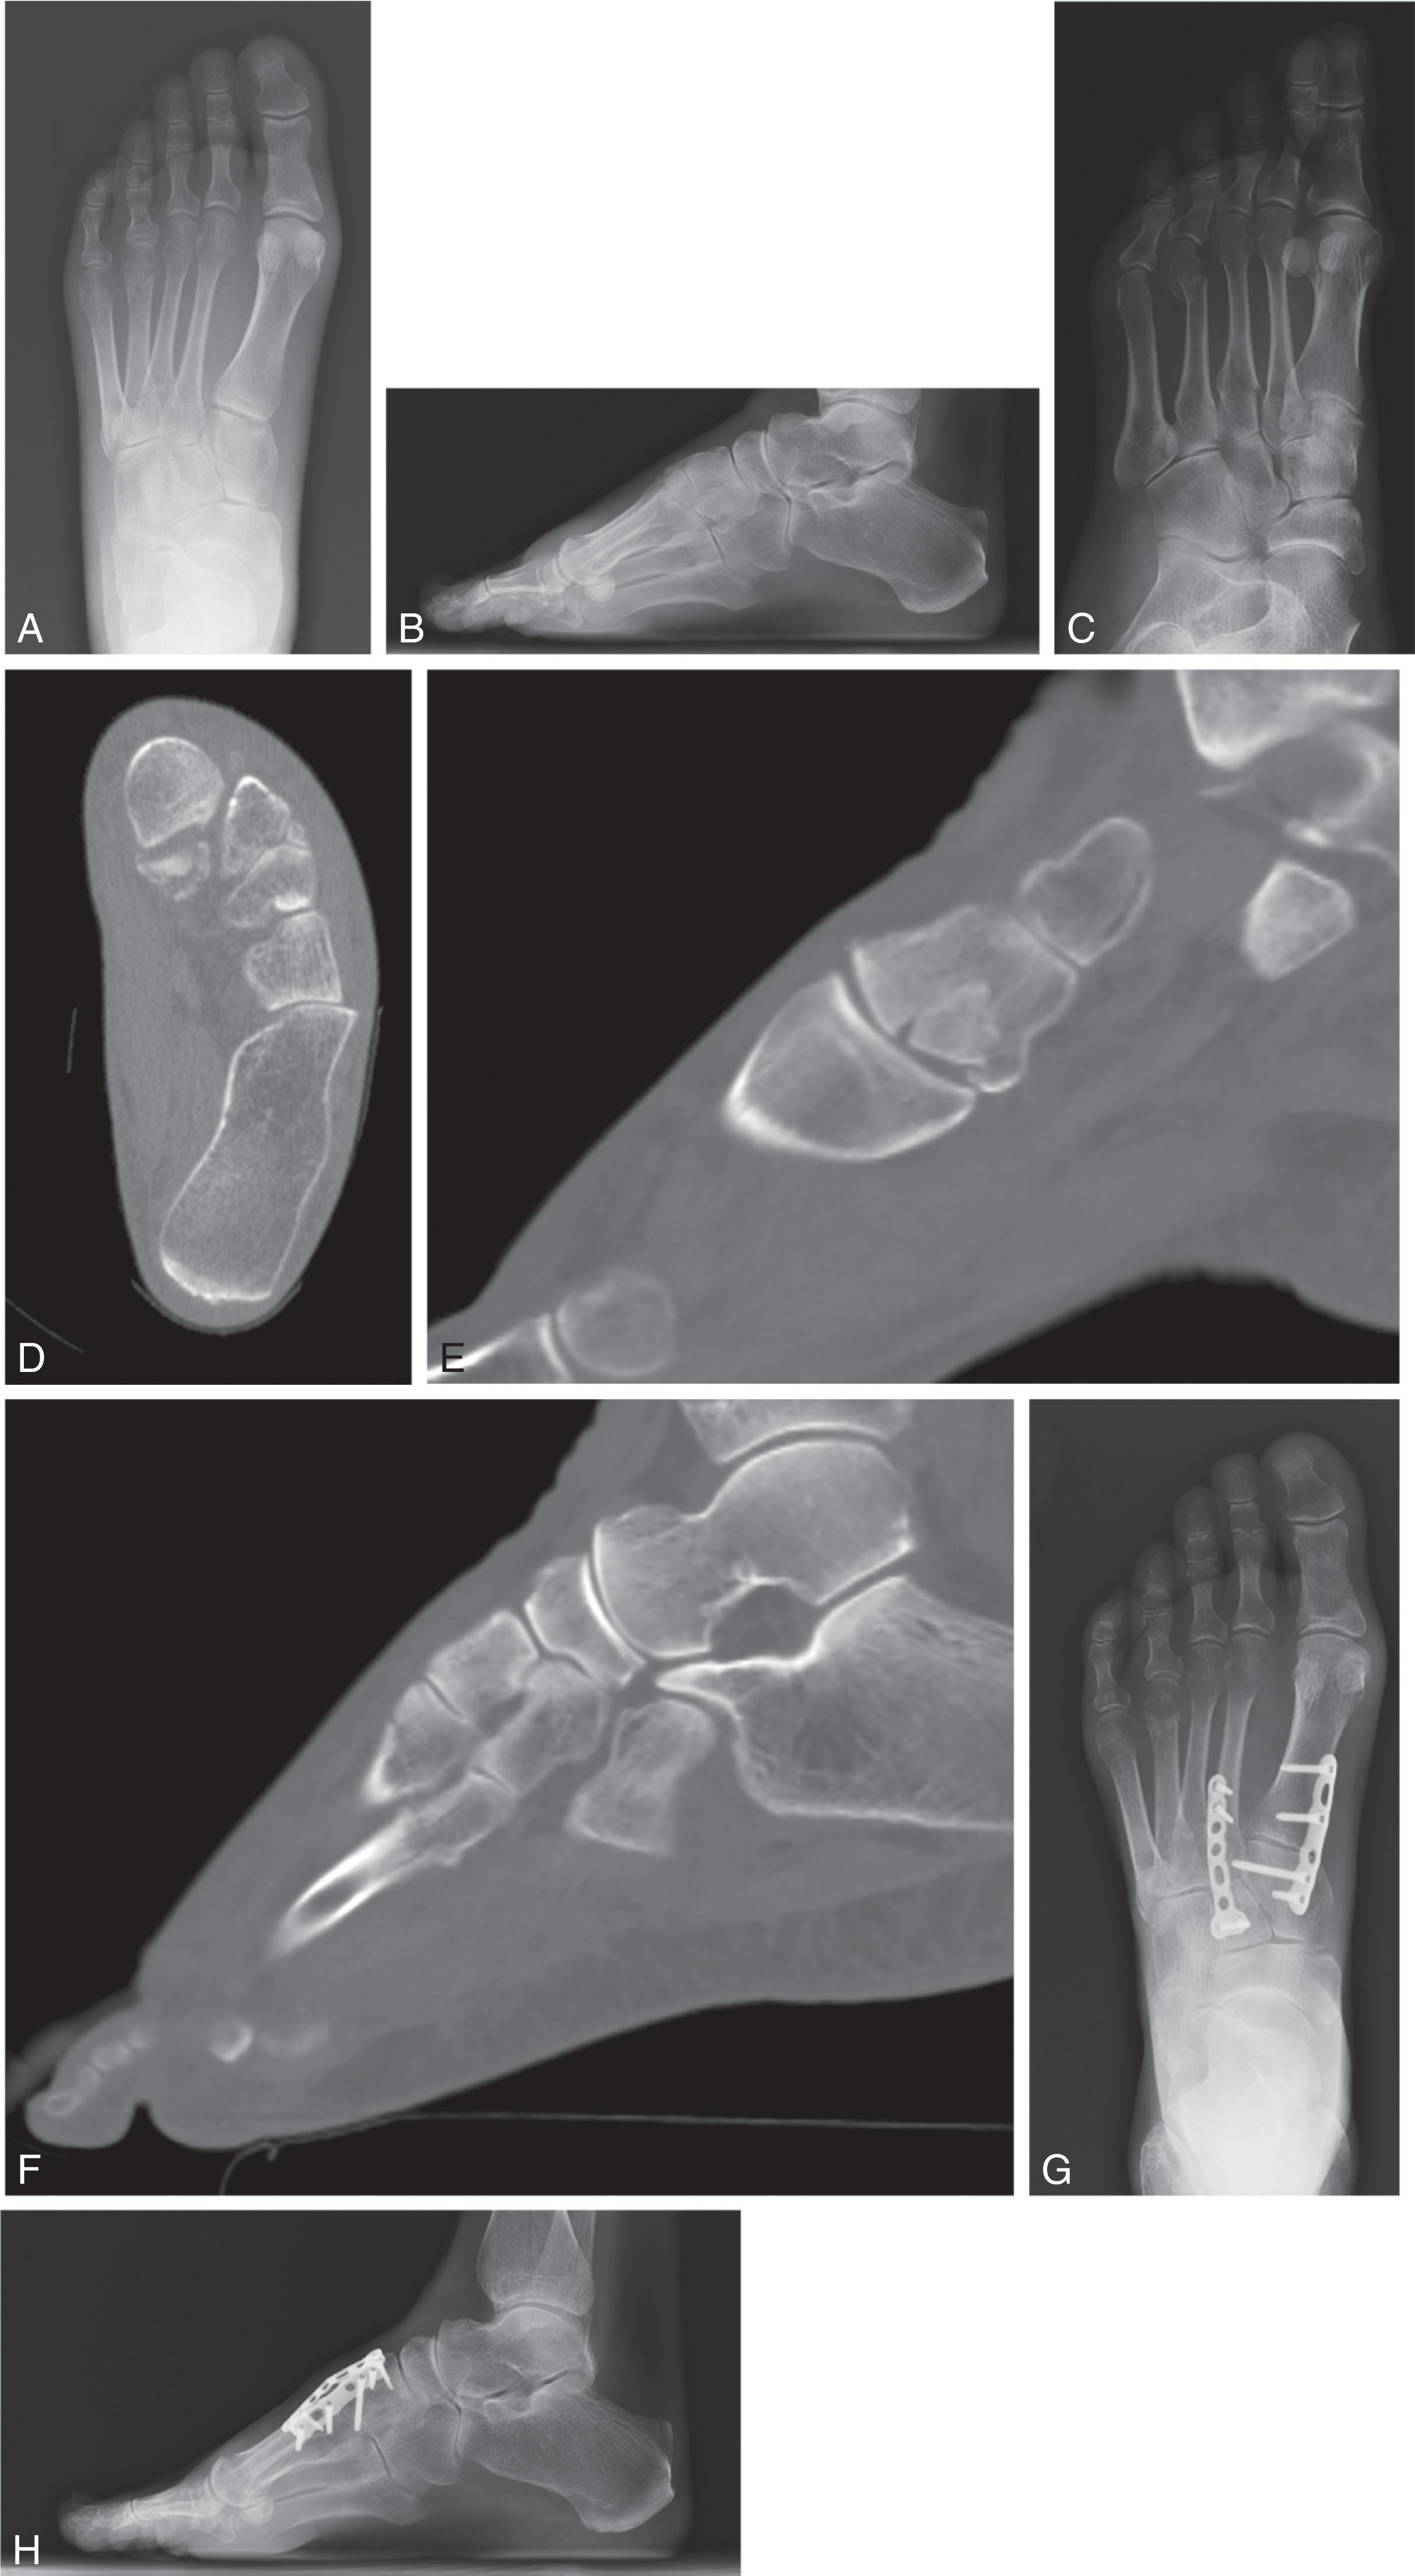 Fig. 47-14, (A to C) Three radiographic views and (D to F) CT scan reveal multiple metatarsal fractures and cuneiform articular impaction fractures. ( G and H ) Decompression of the articular surface and bridge plating is performed to restore length and maintain stability for healing.